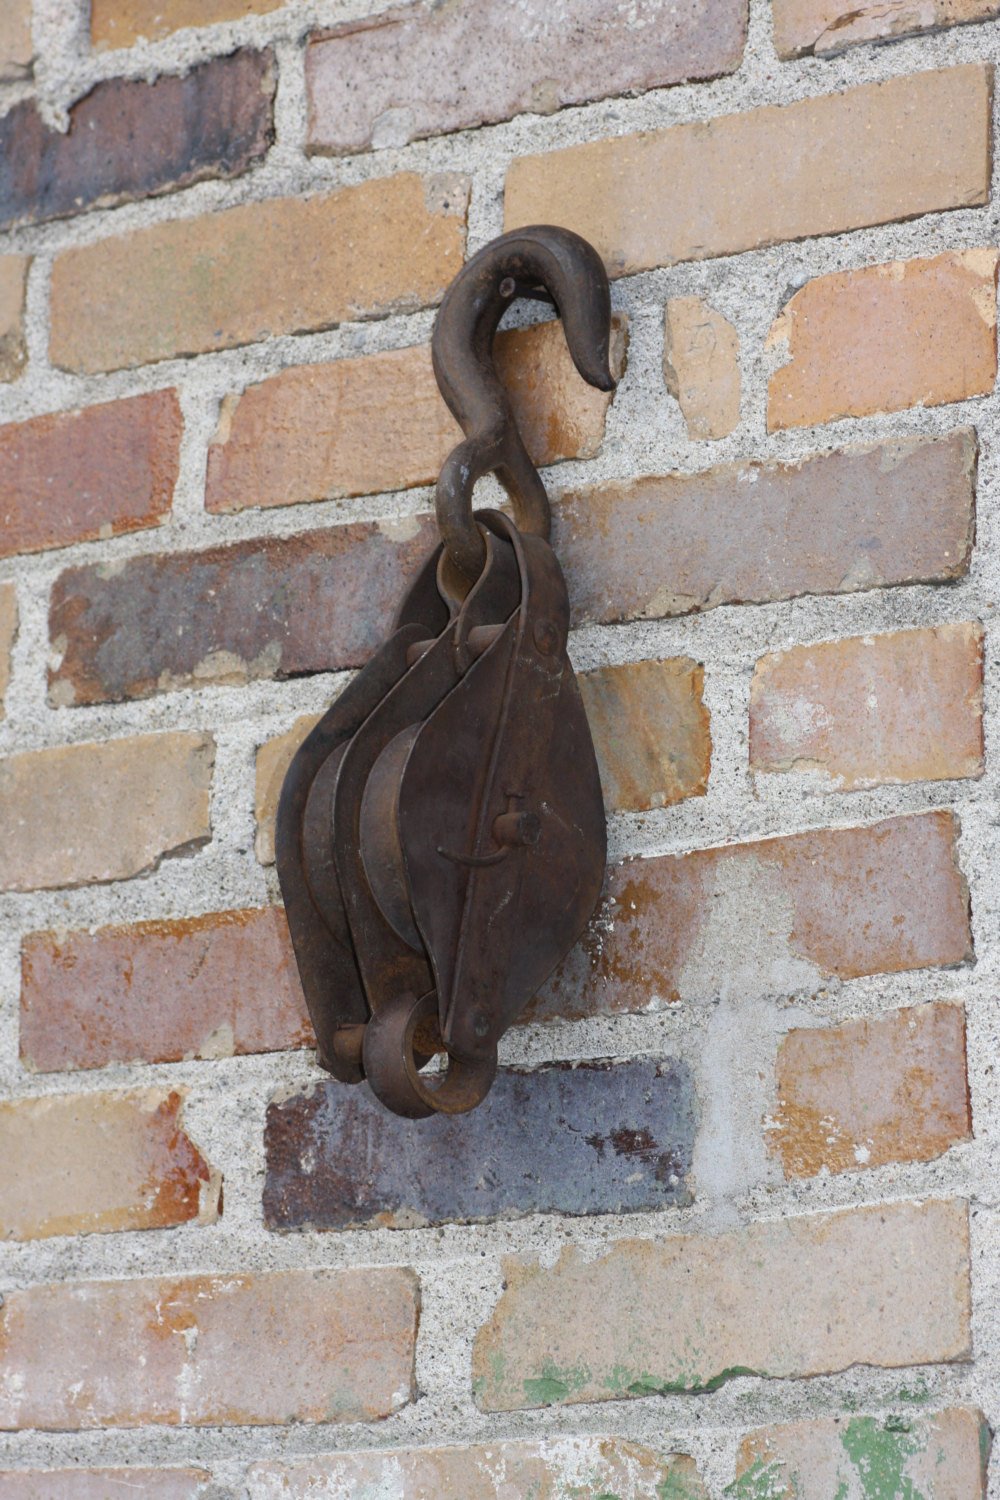 Rustic Pulley Vintage Industrial Decor - Eagle's Eye Finds